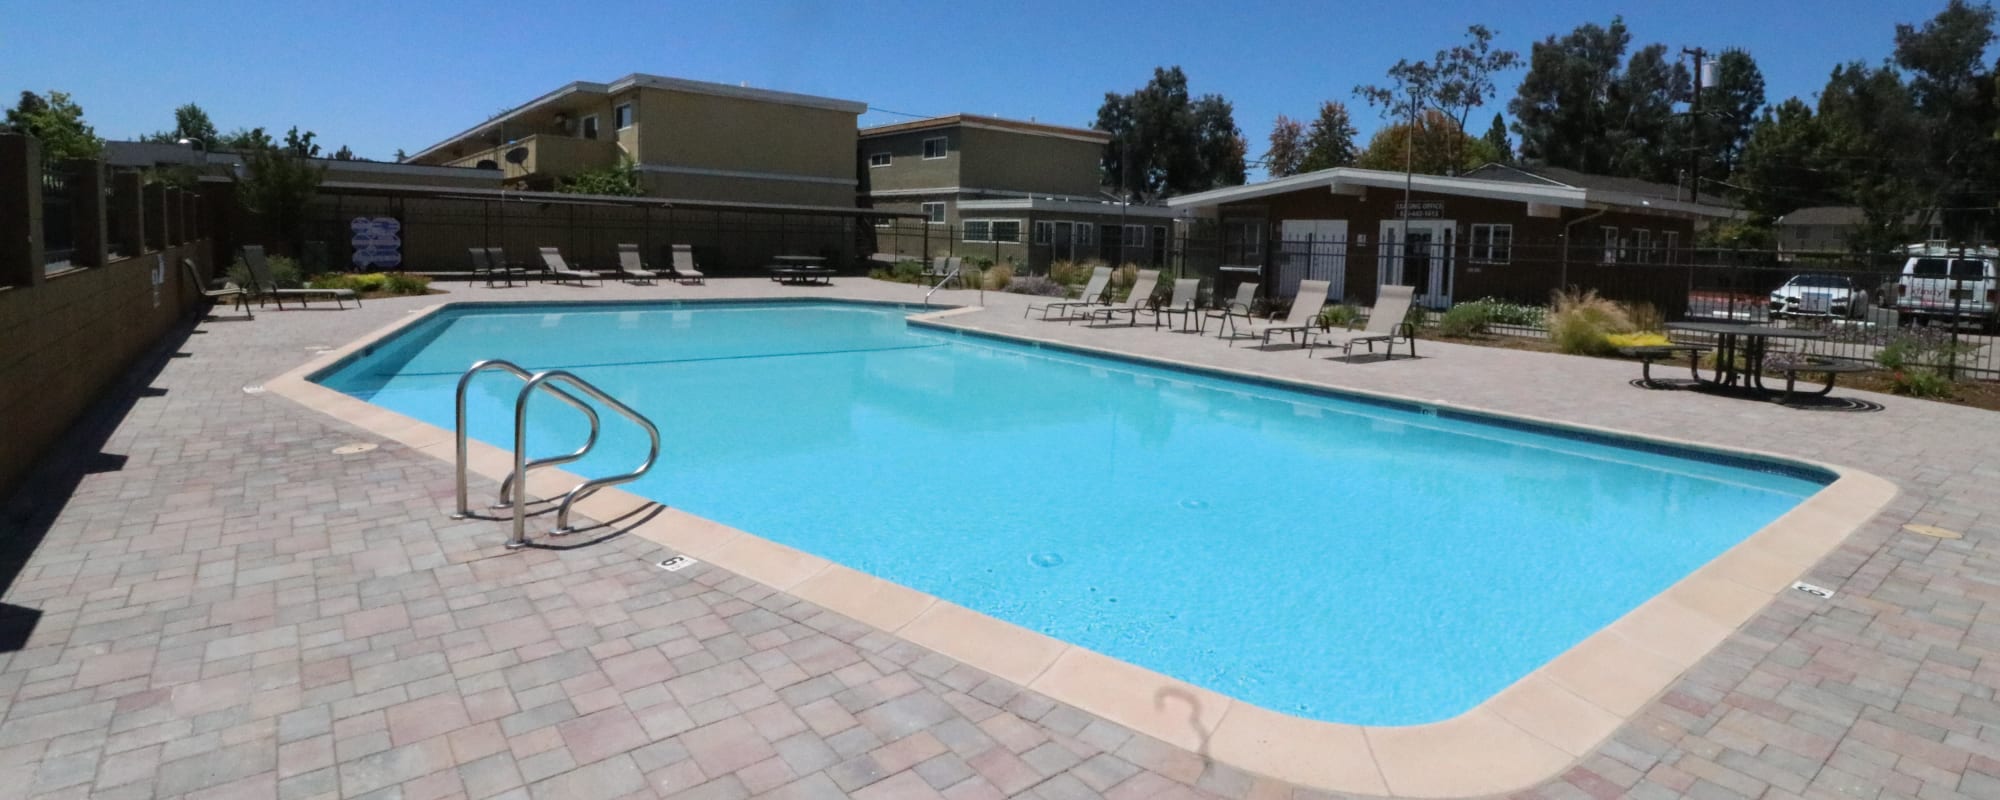 Photos of Briarwood Apartments in Livermore, California